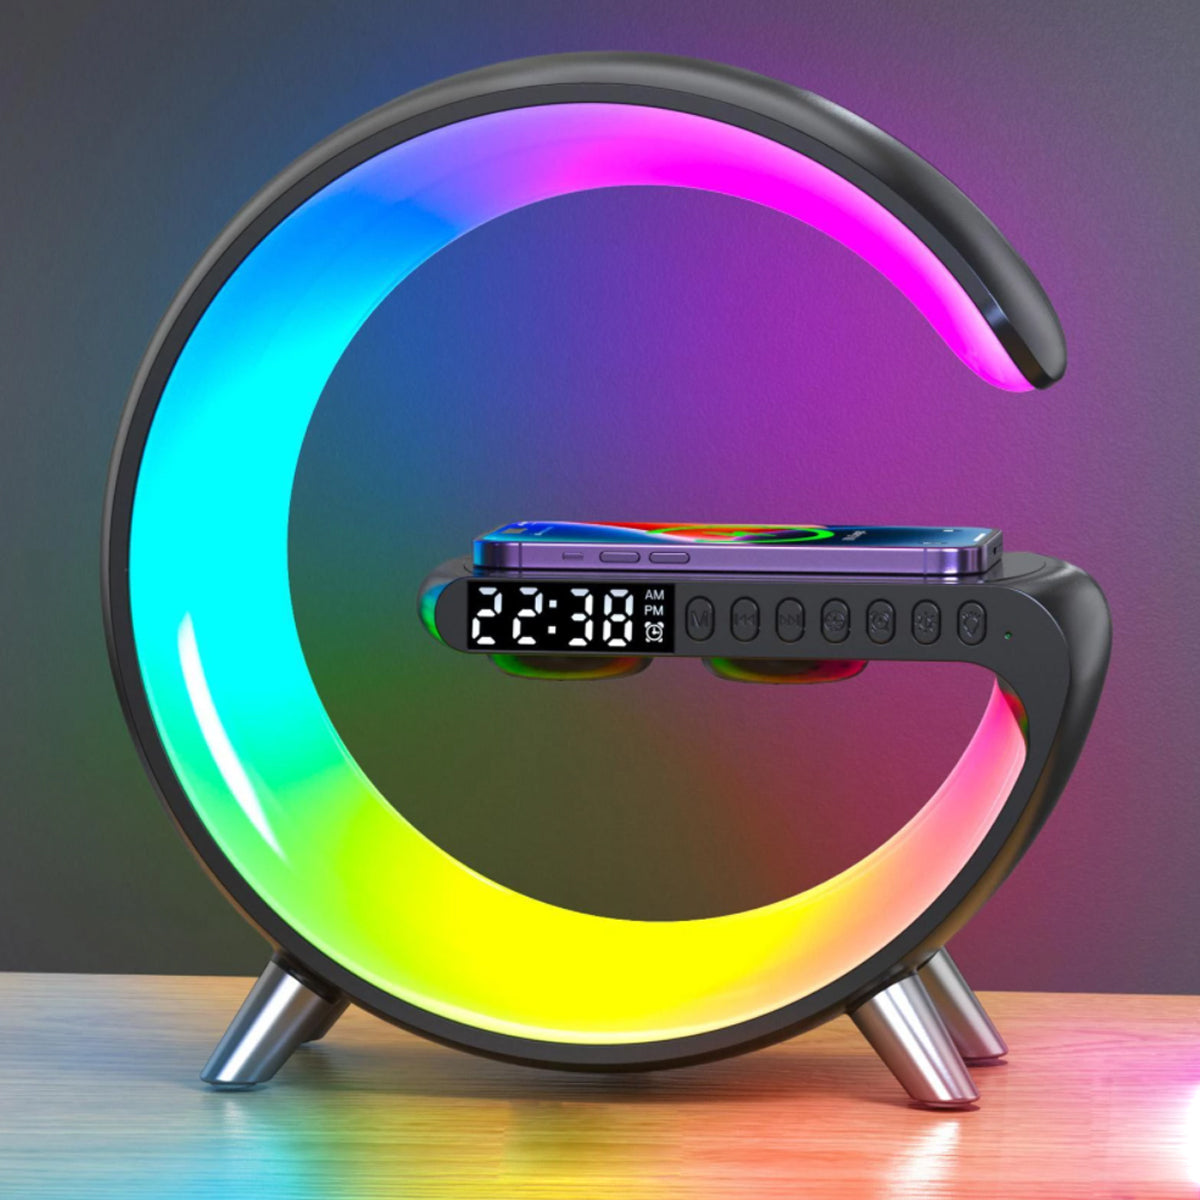  Mooncave Light Wireless Charger And Speaker With Clock by VistaShops VistaShops Perfumarie